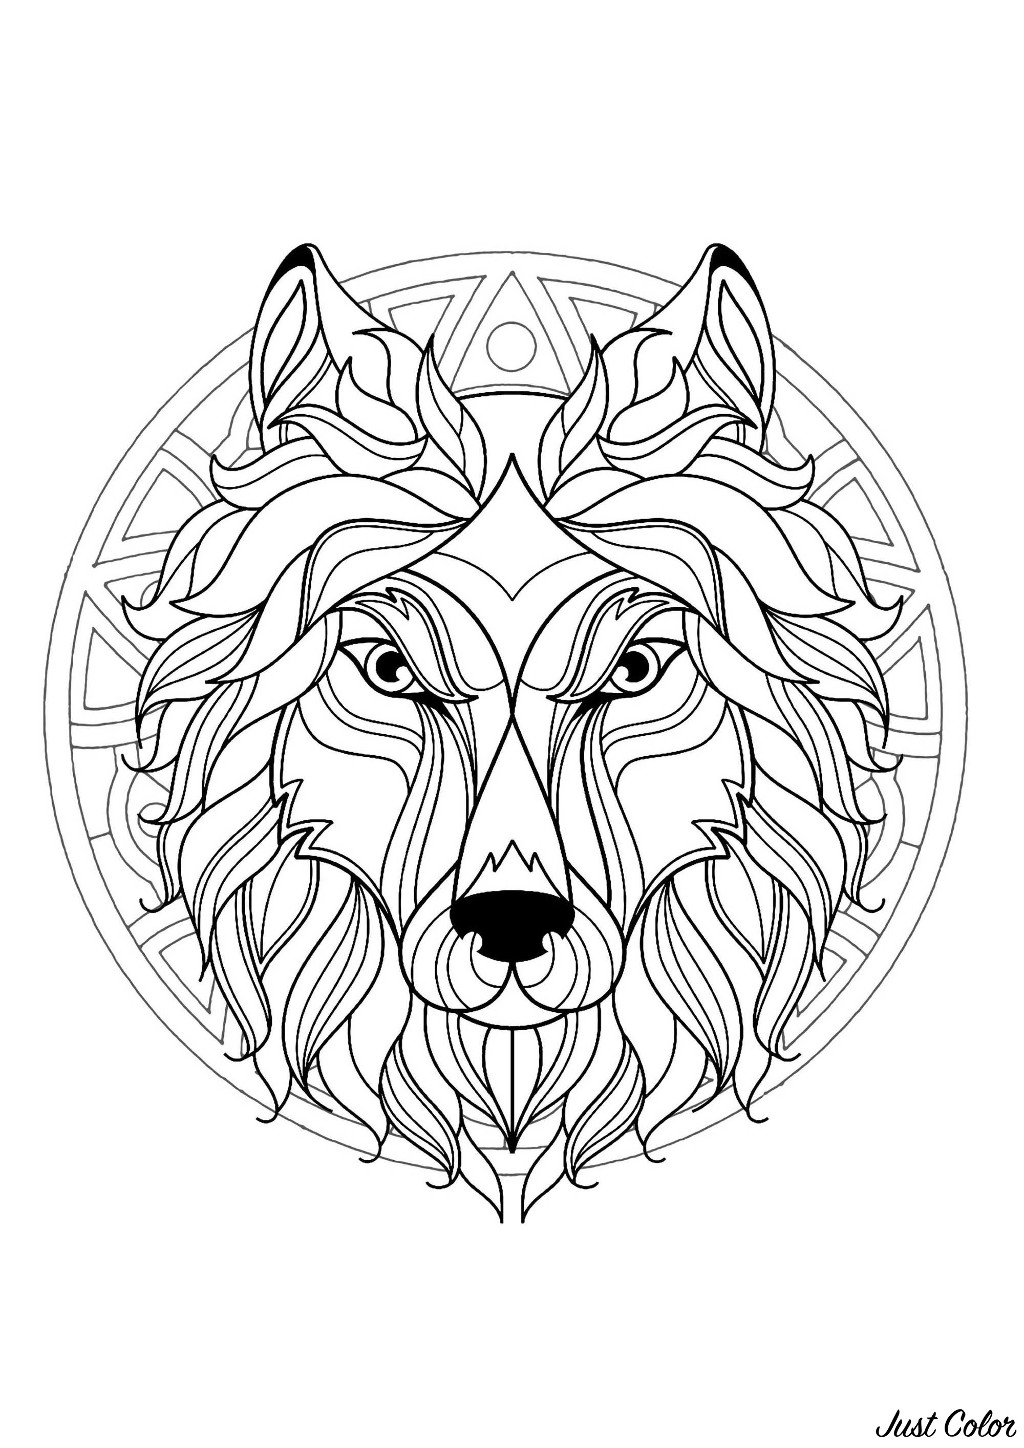 Wolf head in a difficult Mandala. If you are ready to spend long minutes of relaxation, get ready to color this complex Mandala ... You can use many colors if you wish. You must clear your mind and allow yourself to forget all your worries and responsibilities.